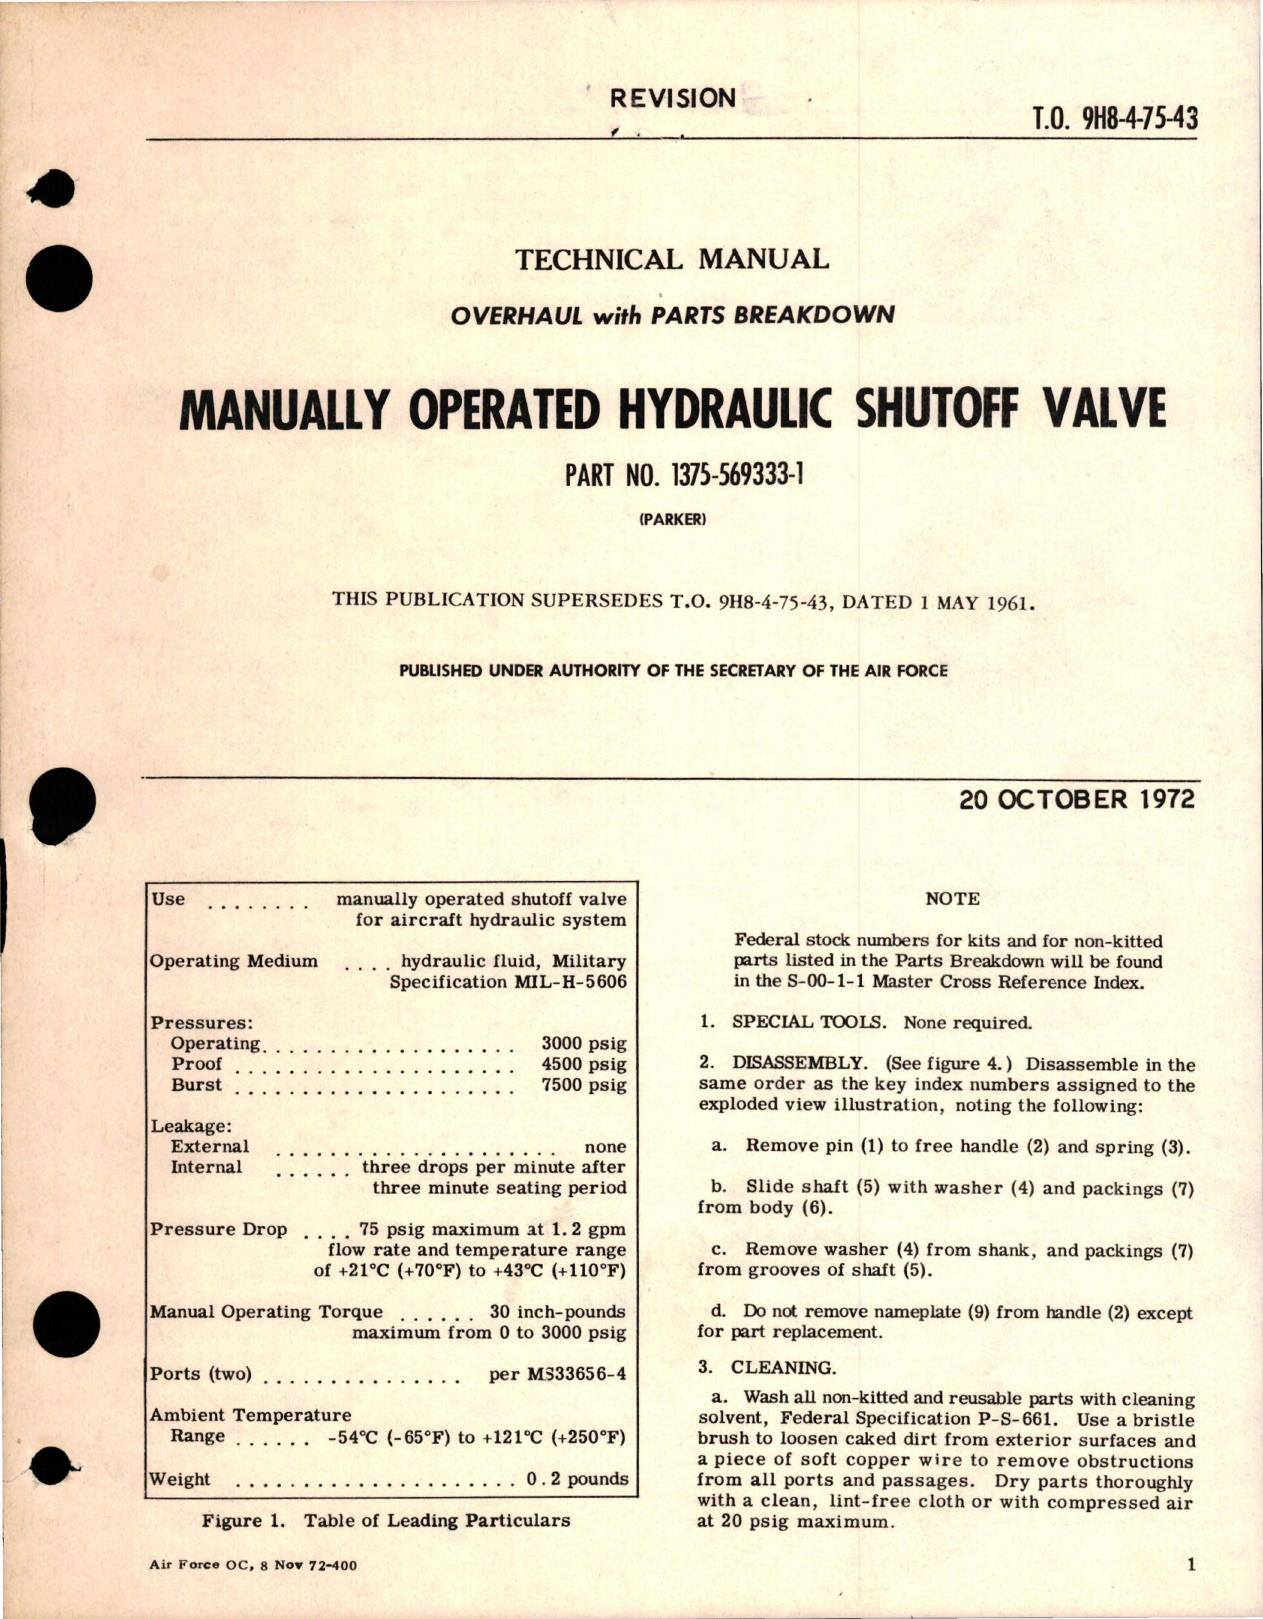 Sample page 1 from AirCorps Library document: Overhaul with Parts for Manually Operated Hydraulic Shutoff Valve - Part 1375-569333-1